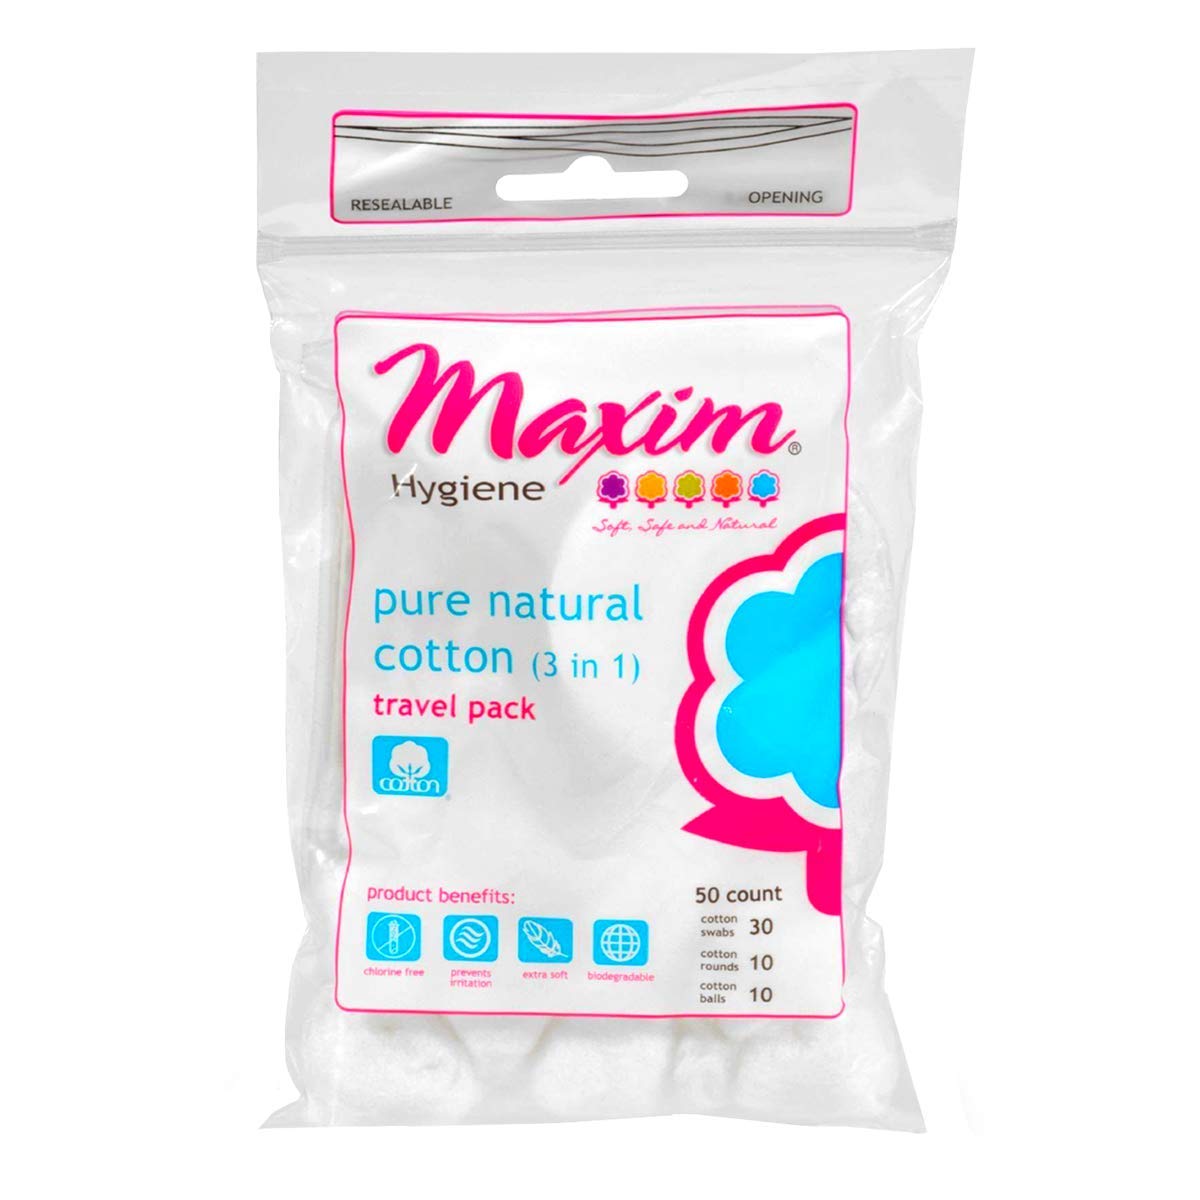 Maxim Natural Cotton Travel Pack, 50ct, Combo (3-in-1, Balls/Rounds/Swabs), No Chlorine/Dioxin, Biodegradable, Hypoallergenic, Gentle Touch, with Paper Stick Swabs, Combo Pack 1 Pack of 50